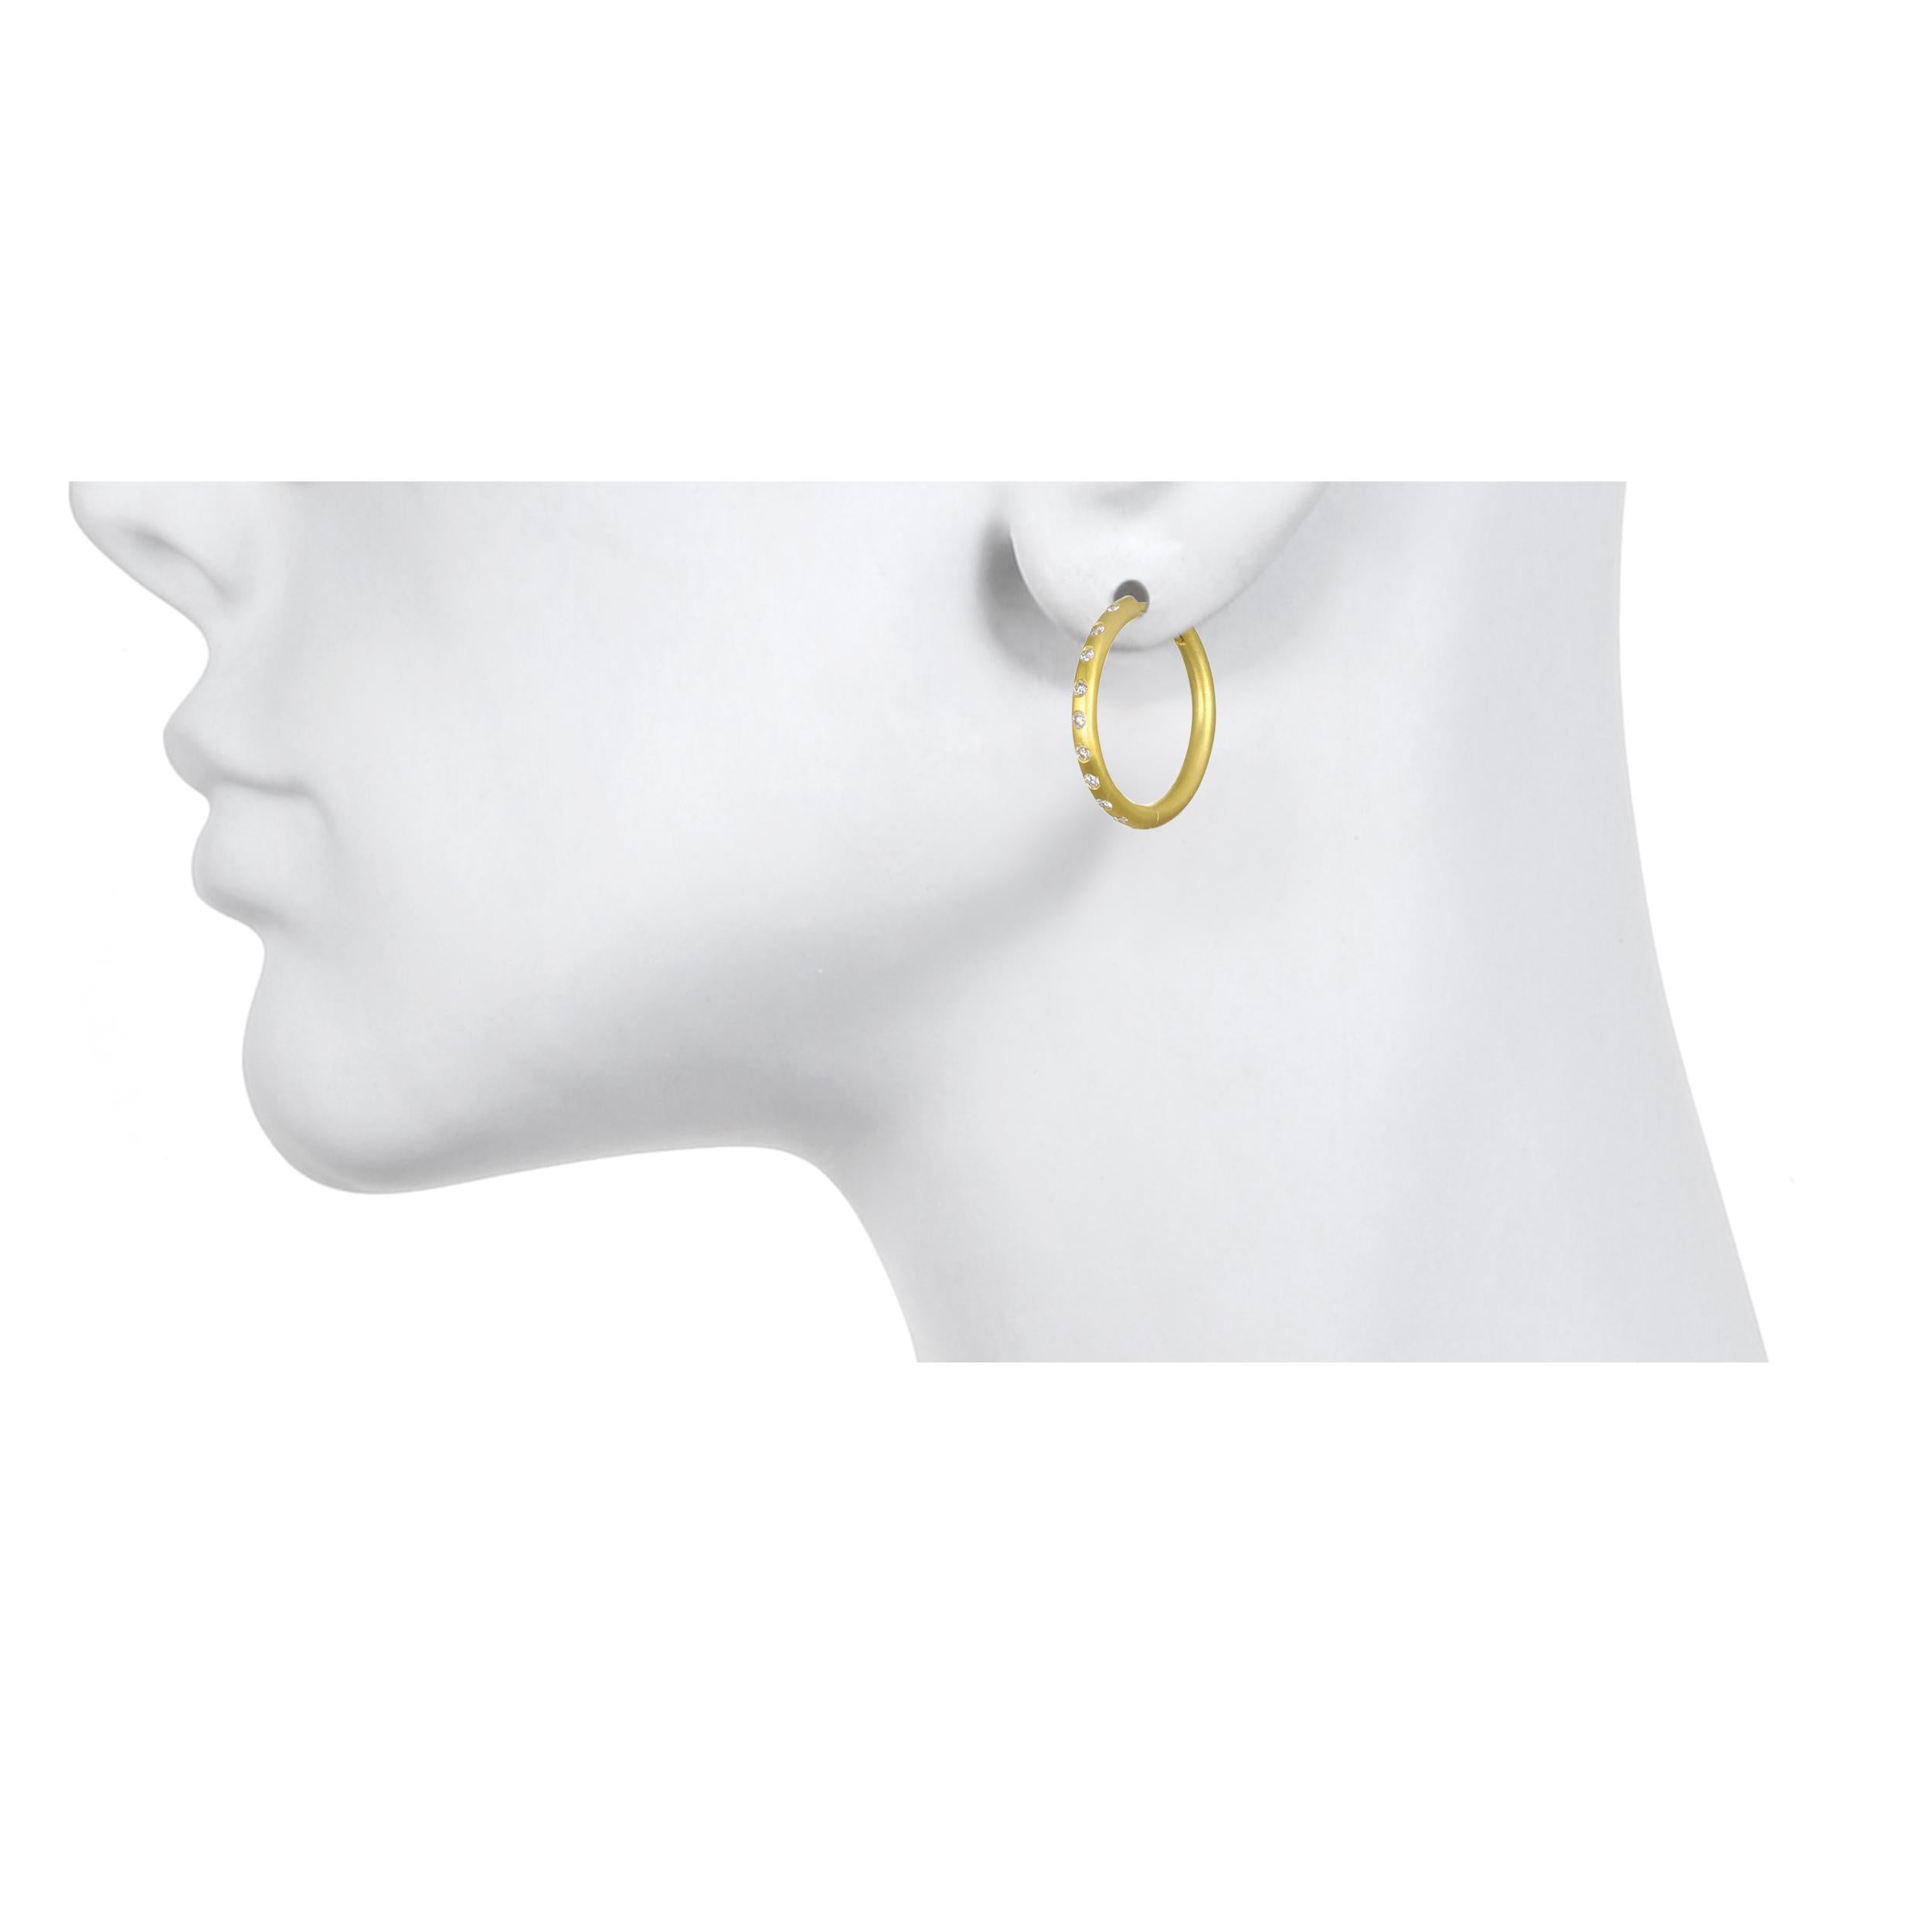 Handcrafted in 18K Green Gold, Faye Kim’s modern hoop design conveys understated elegance and a truly stylish, everyday look! Hoops are solid with a hinged mechanism. Complete with burnished diamonds for extra sparkle!

Diamonds = .38 carats twt,